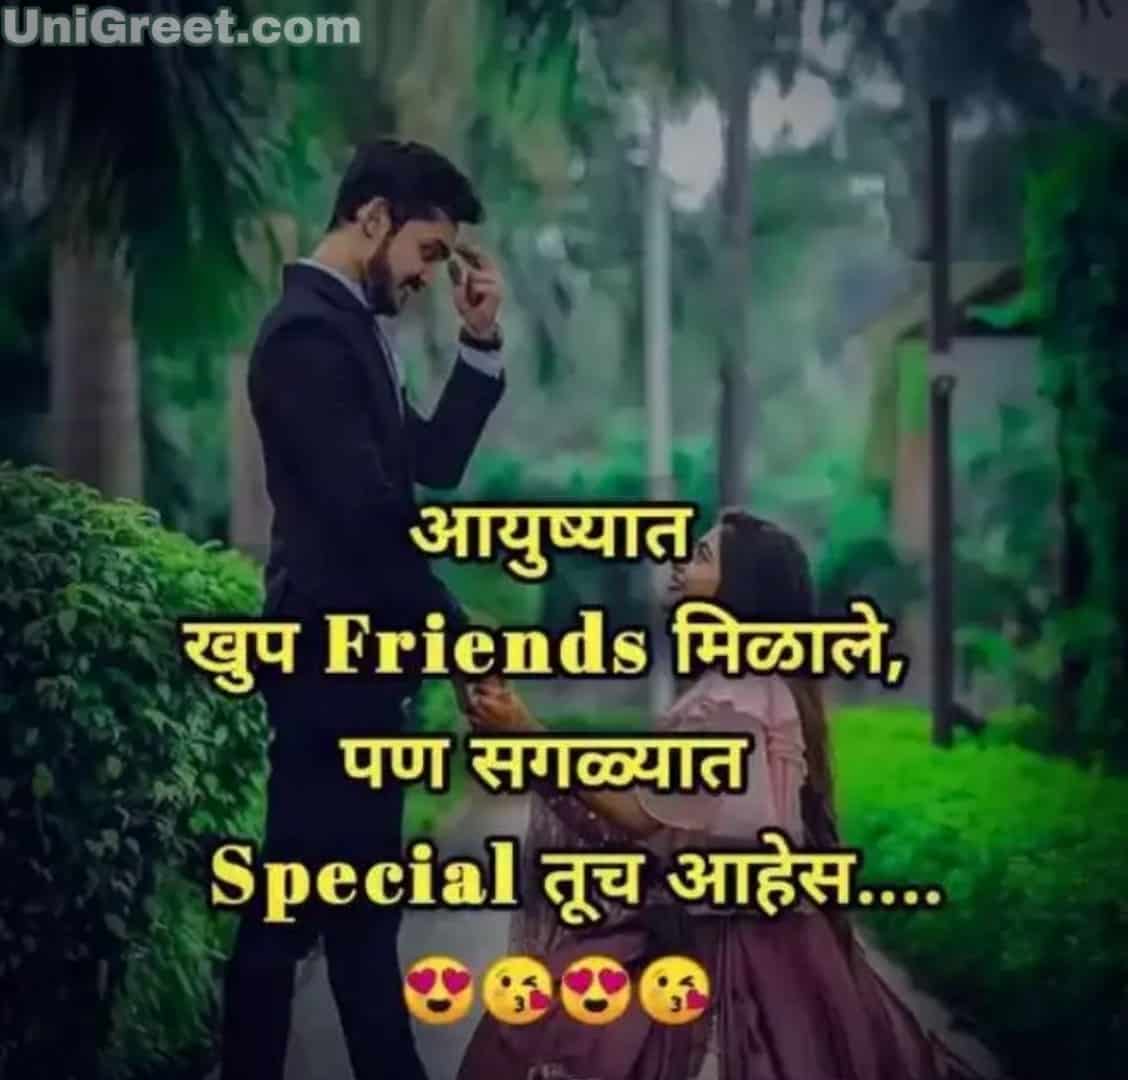 Shayari for in 2021 best dating friend my hindi quotes best Friendship Jokes